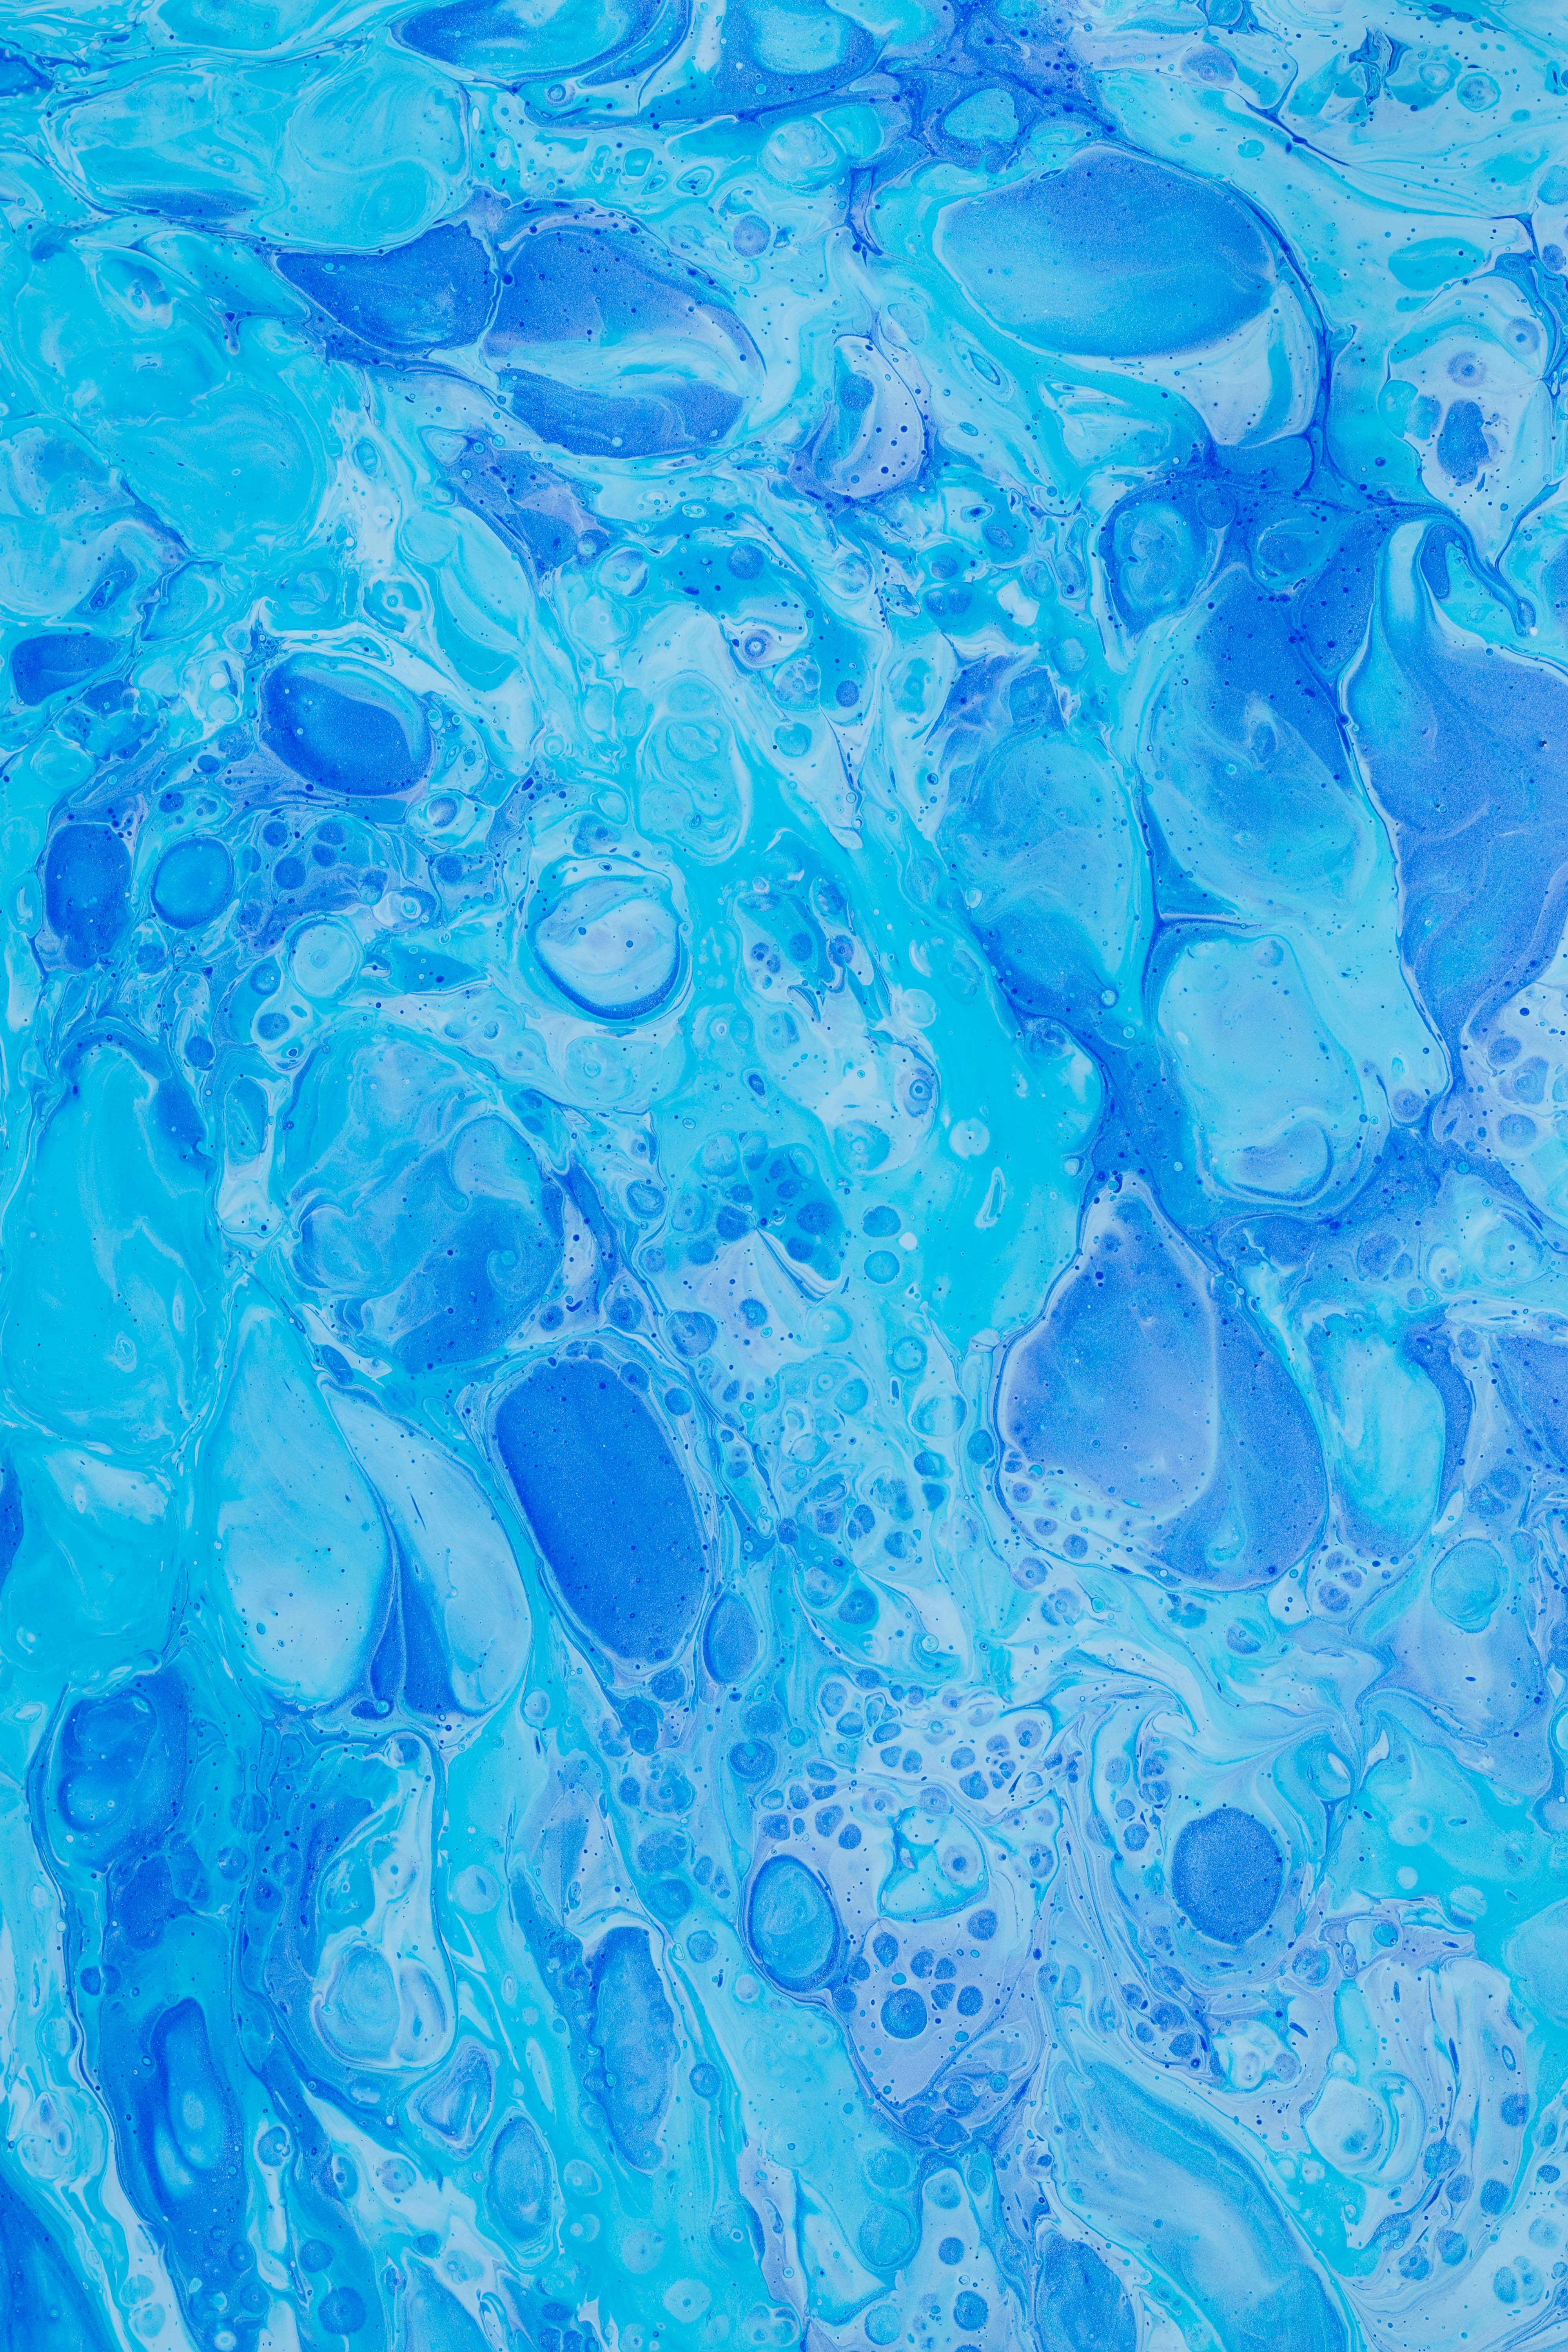 Free HD watercolor, blue, abstract, paint, stains, spots